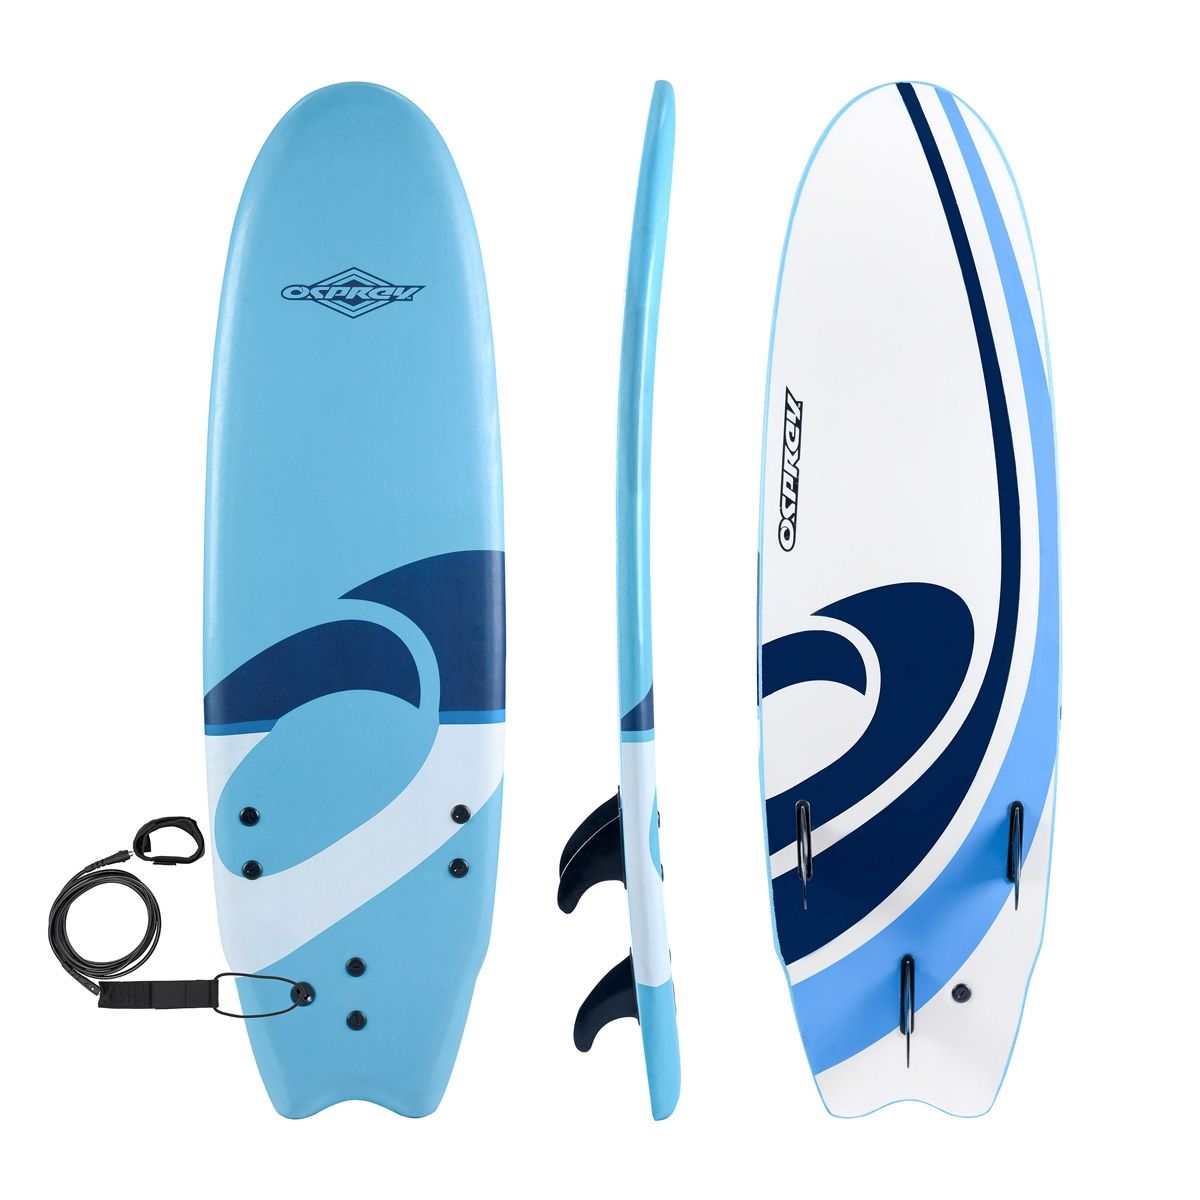 Wood Effect Osprey Foam Surfboard Soft Foamie Complete with Leash and Fins 5 ft/6 ft/7 ft/8 ft 